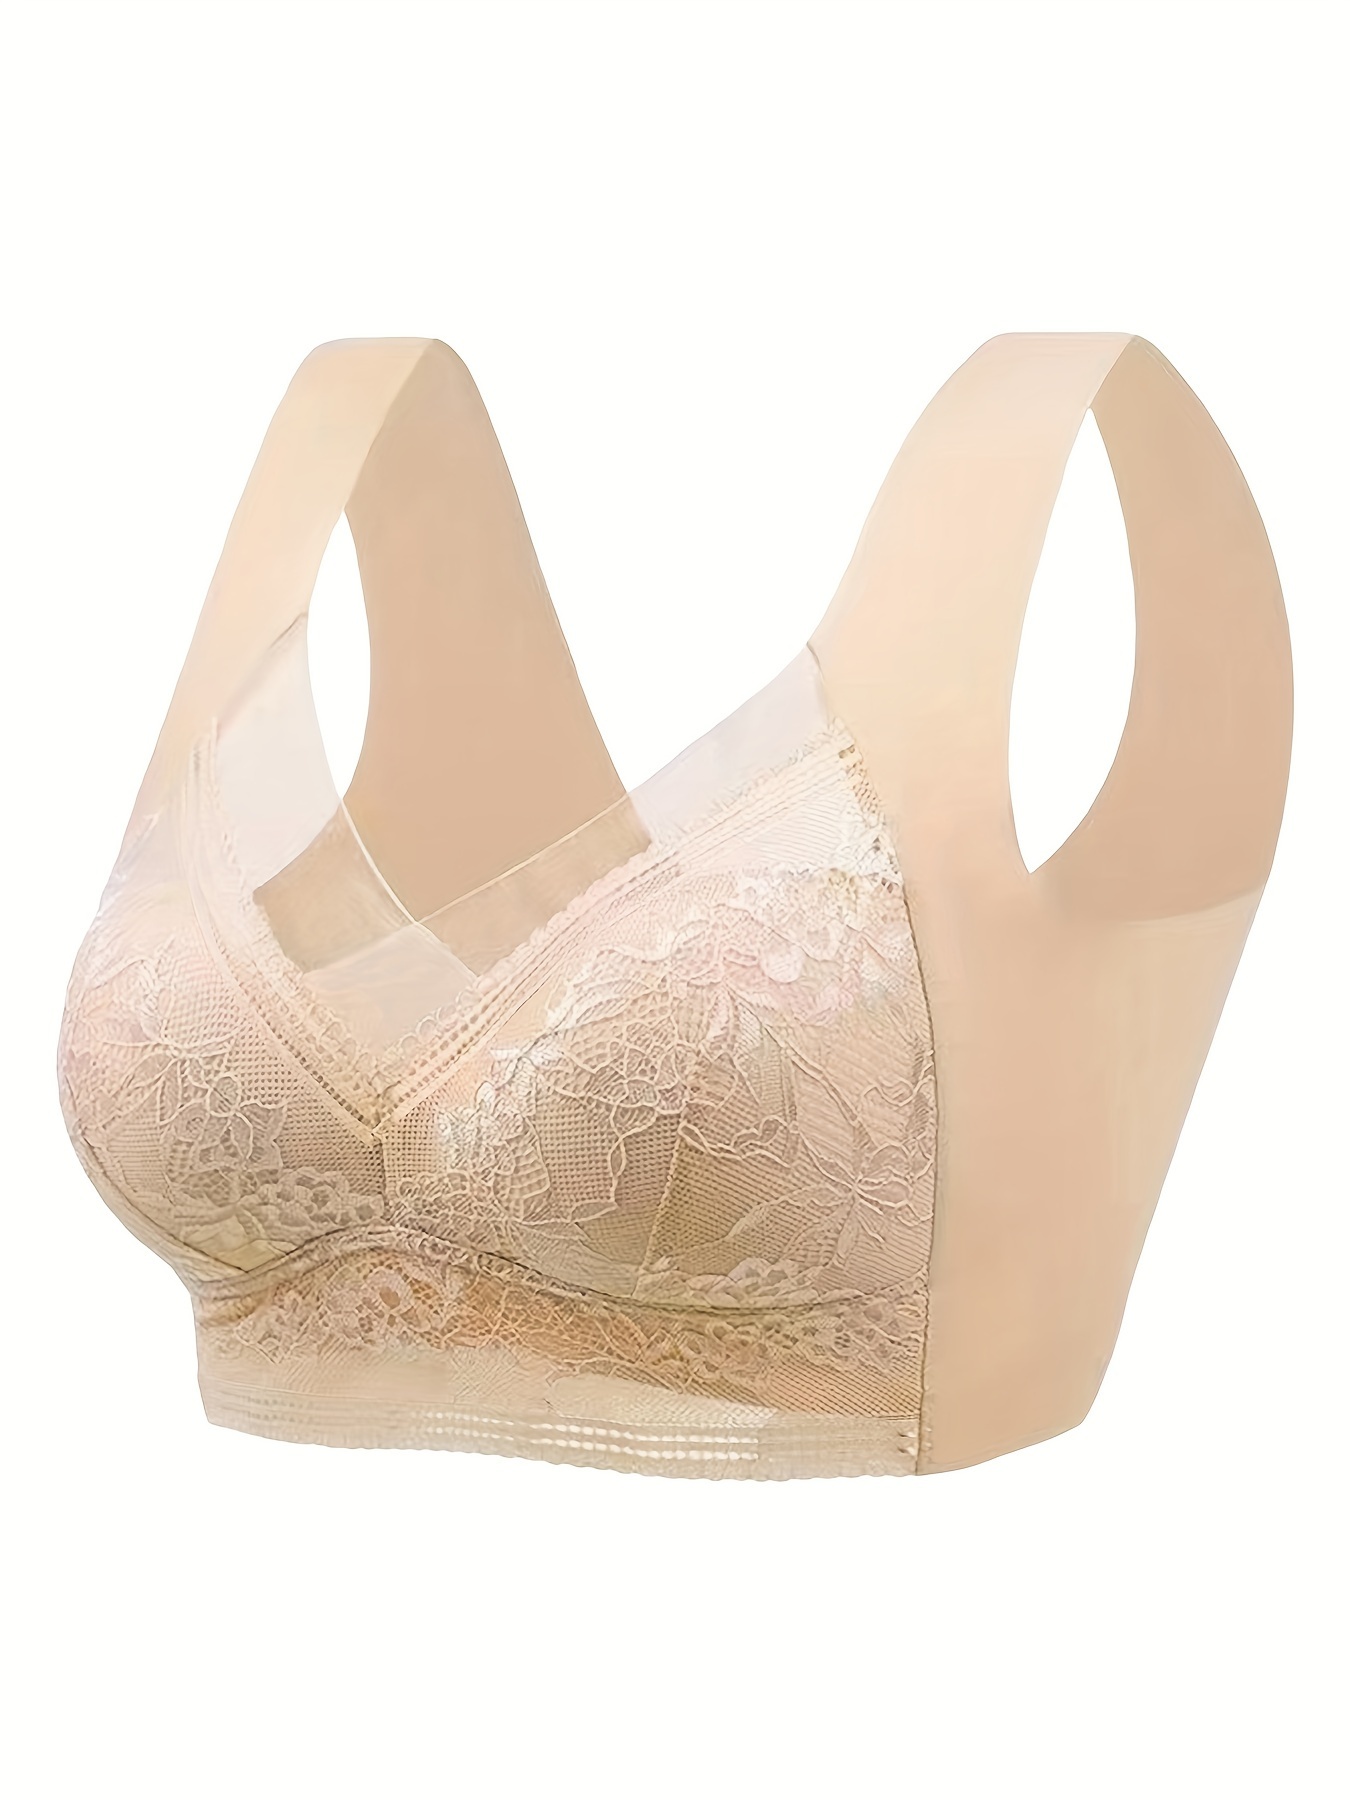 Push Up Bra with Laces - Beige, Intimates